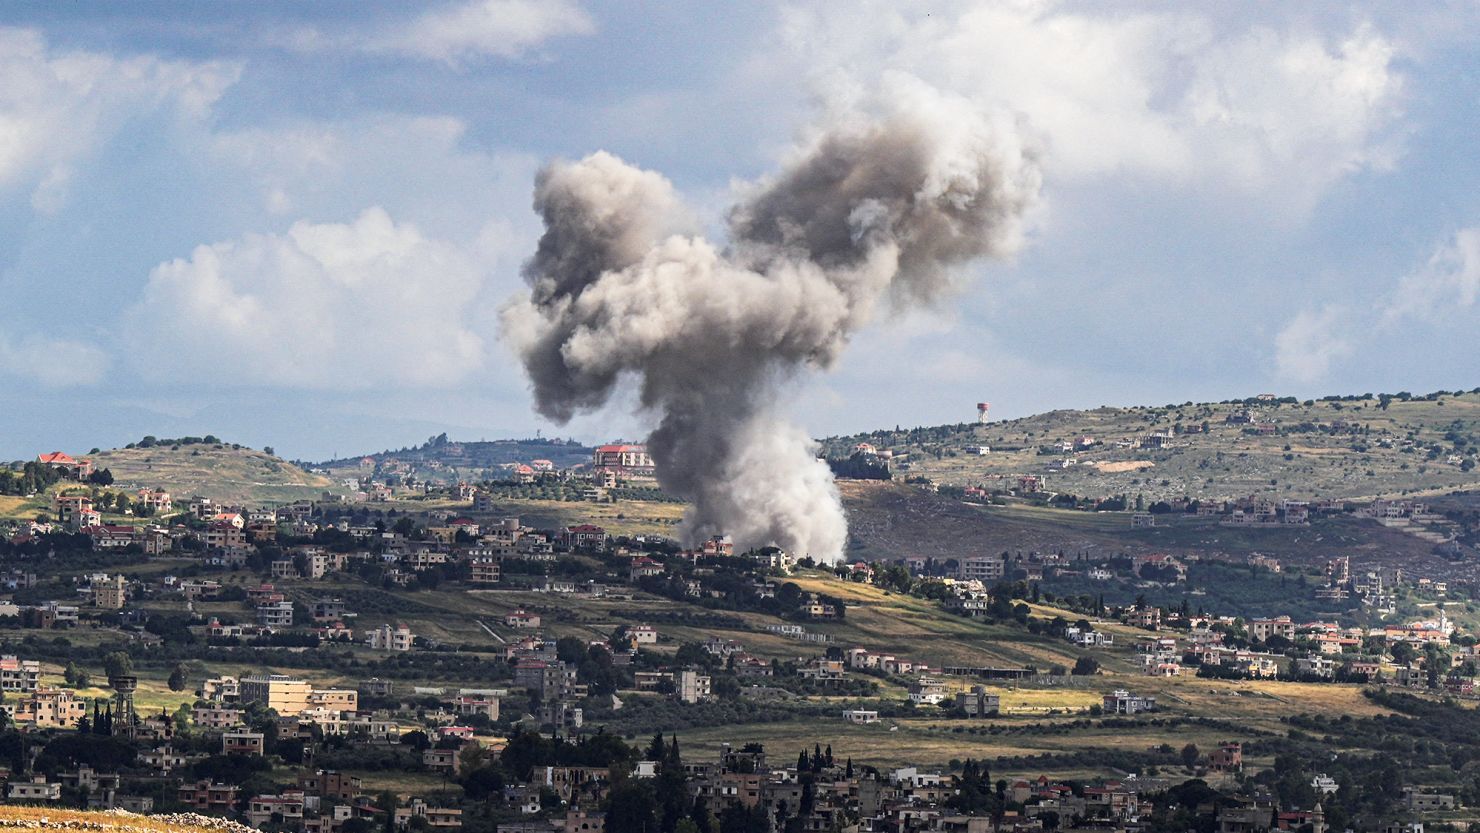 Tensions Escalate: Israel and Hezbollah Exchange Strikes Amid Regional Unrest